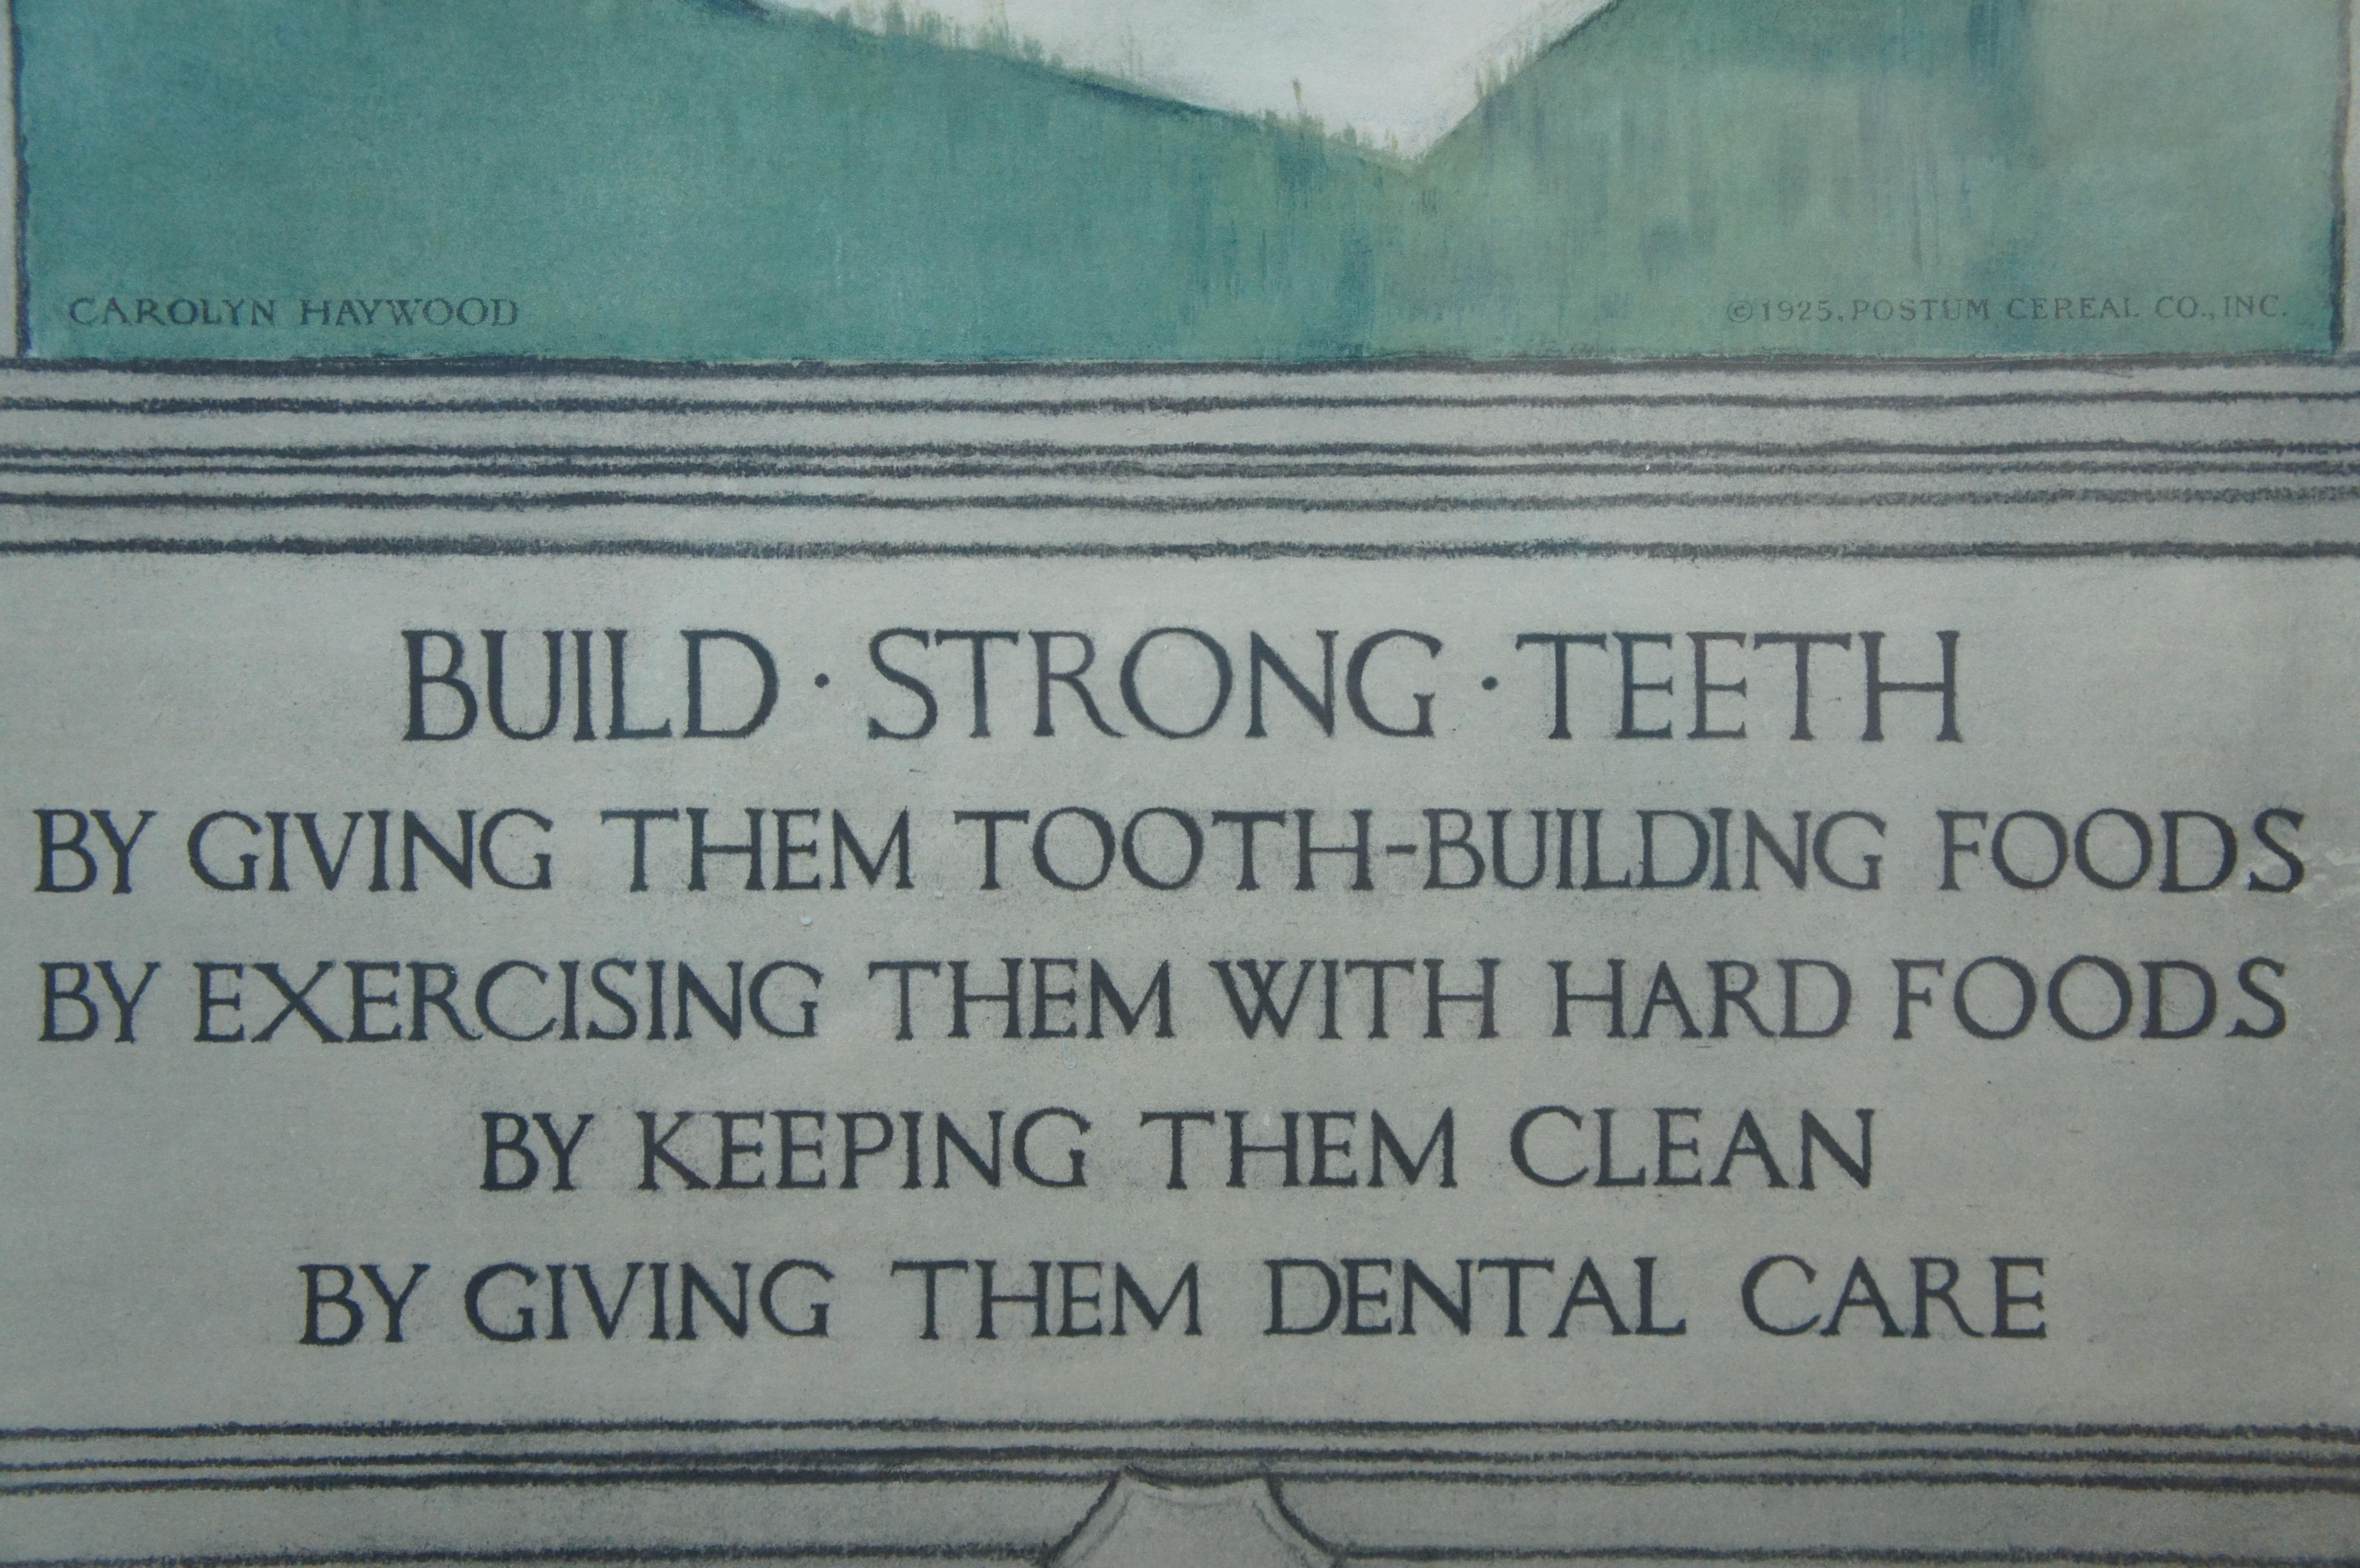 Antique 1925 Post Cereal Carolyn Haywood Build Strong Teeth Ad Poster 45